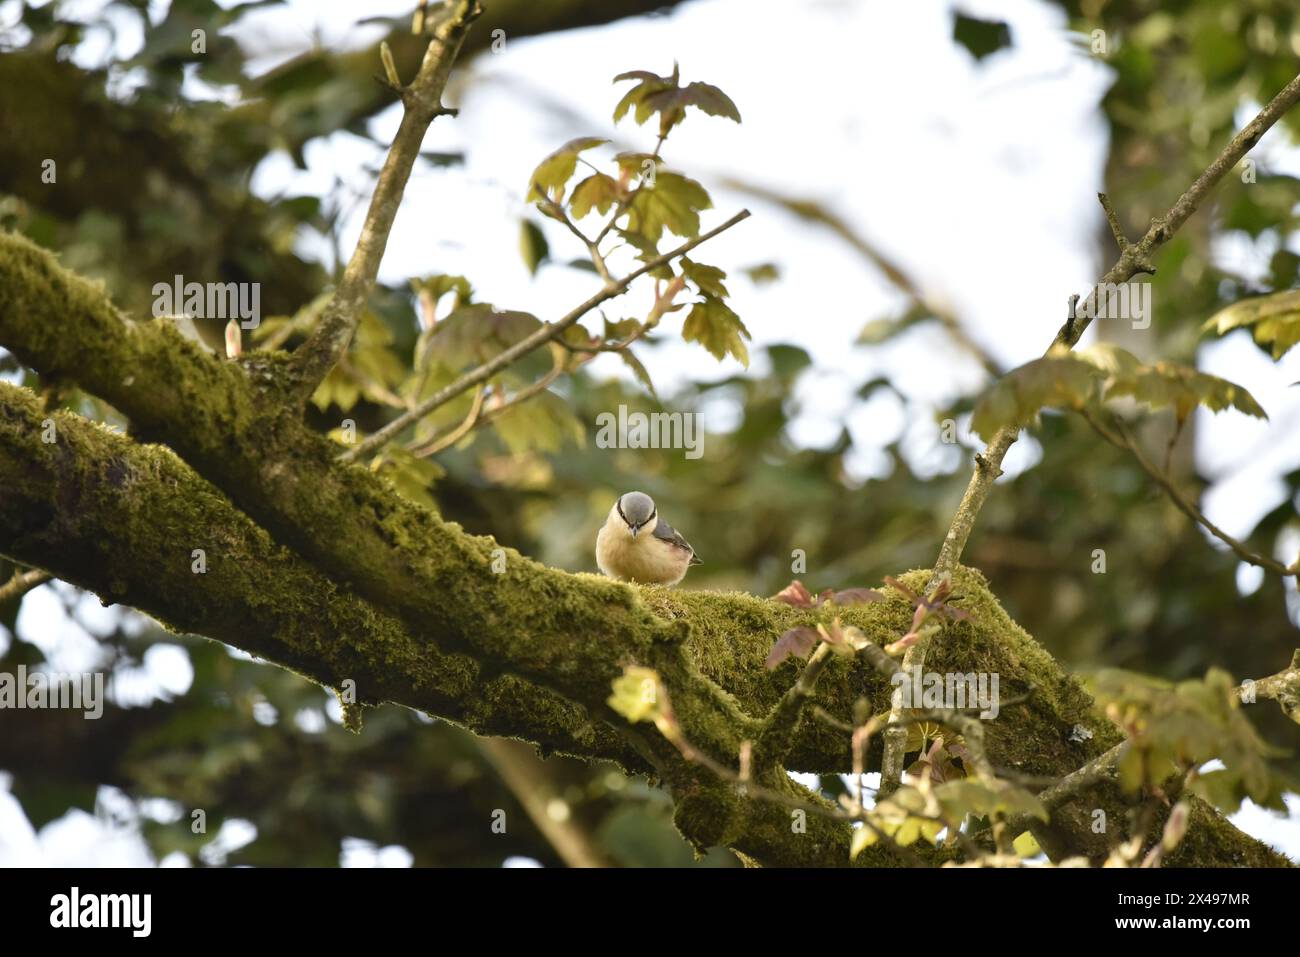 Eurasian Nuthatch (Sitta europaea) Facing Camera from a Mossy Tree Branch, Looking Downwards, against a Leafy Green Background, taken in Wales, UK Stock Photo